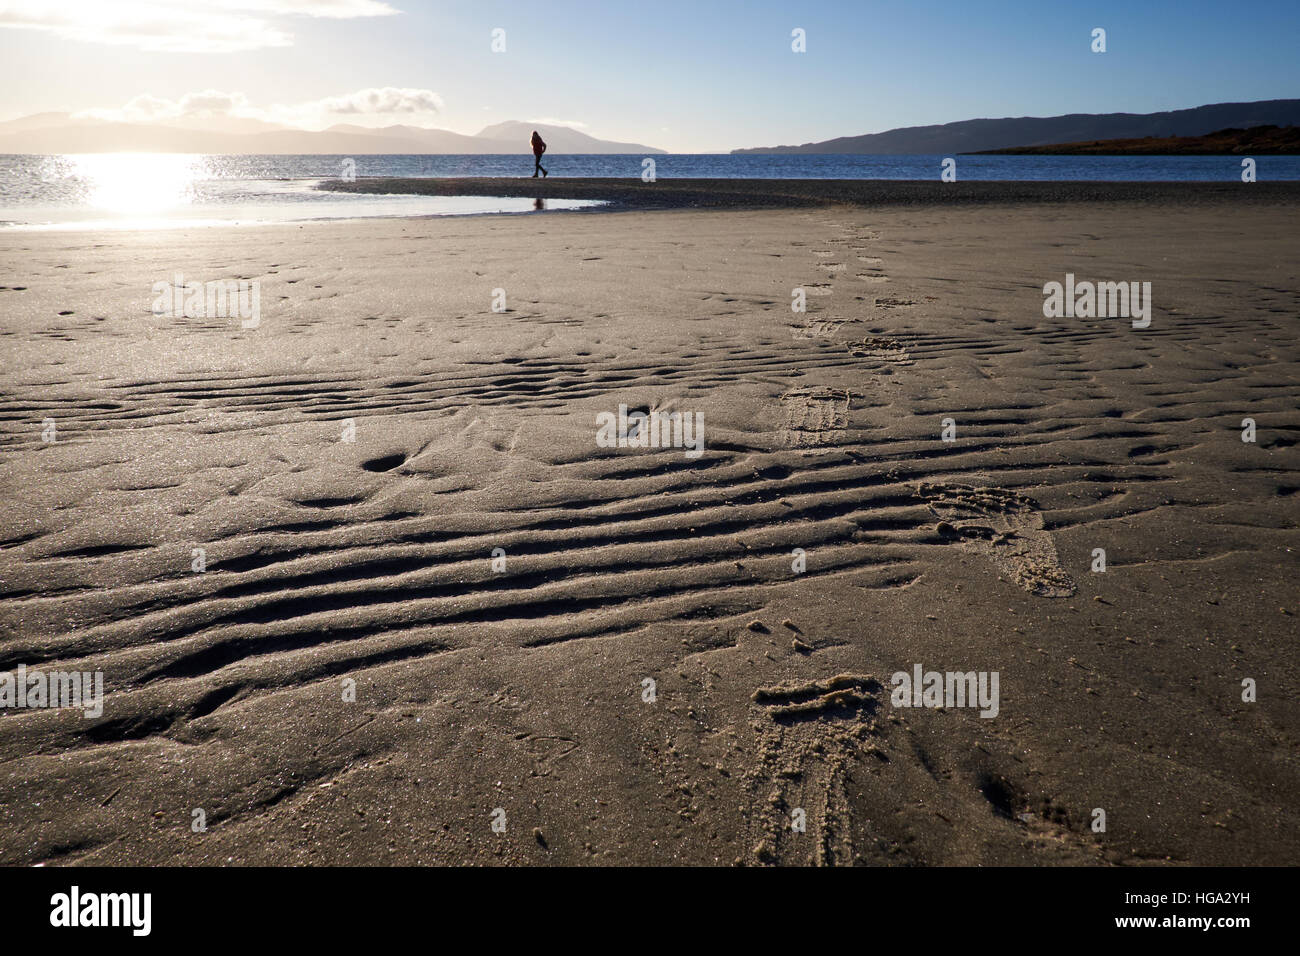 Kilbride bay sands at low tide showing the sand banks, surrounding hills and a clear sky. A figure stands in the distance. Stock Photo